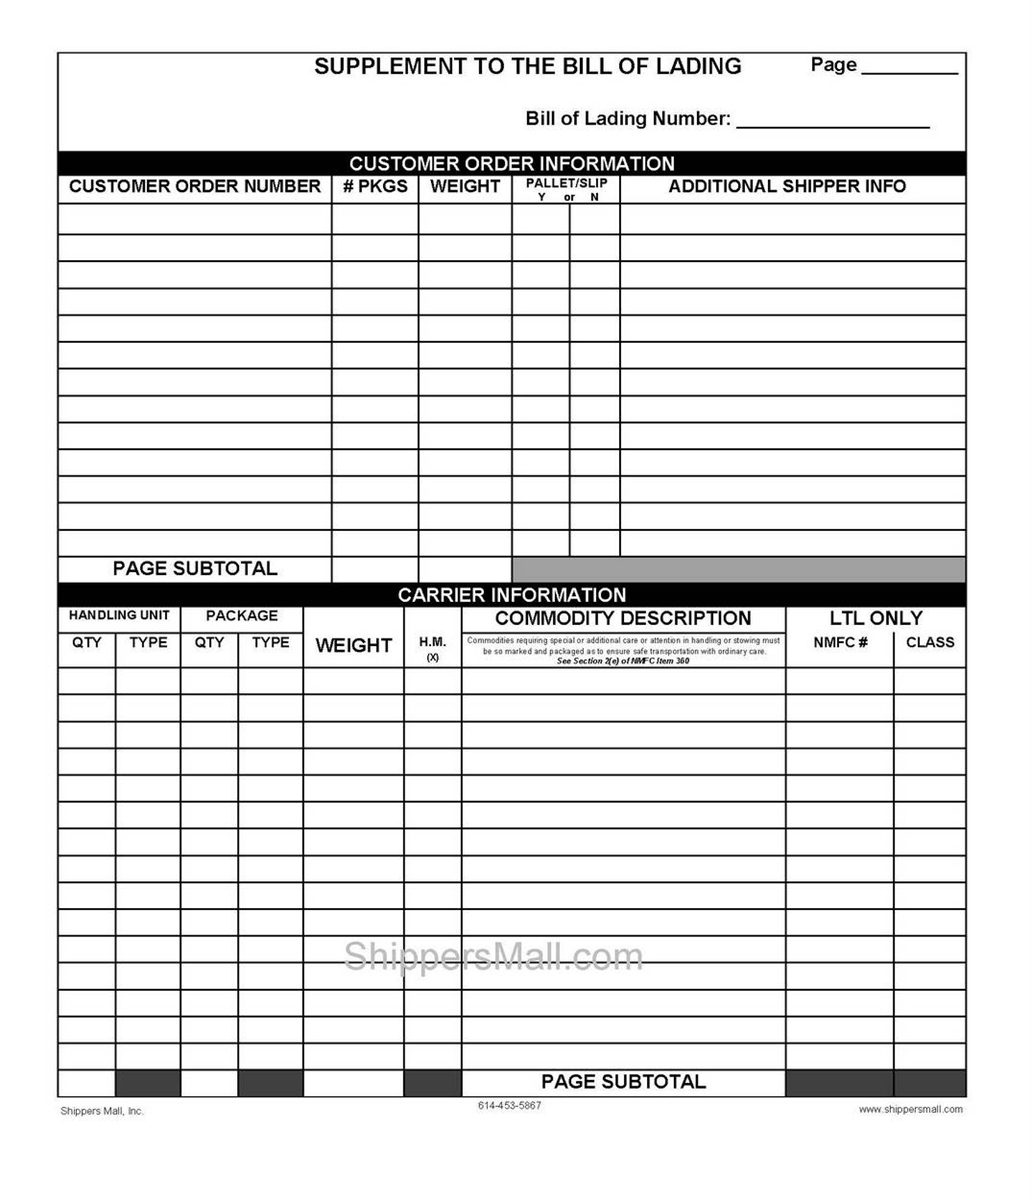 FREEVICS03 , VICS Compliant Bill of Lading in a PDF format.Wholesale